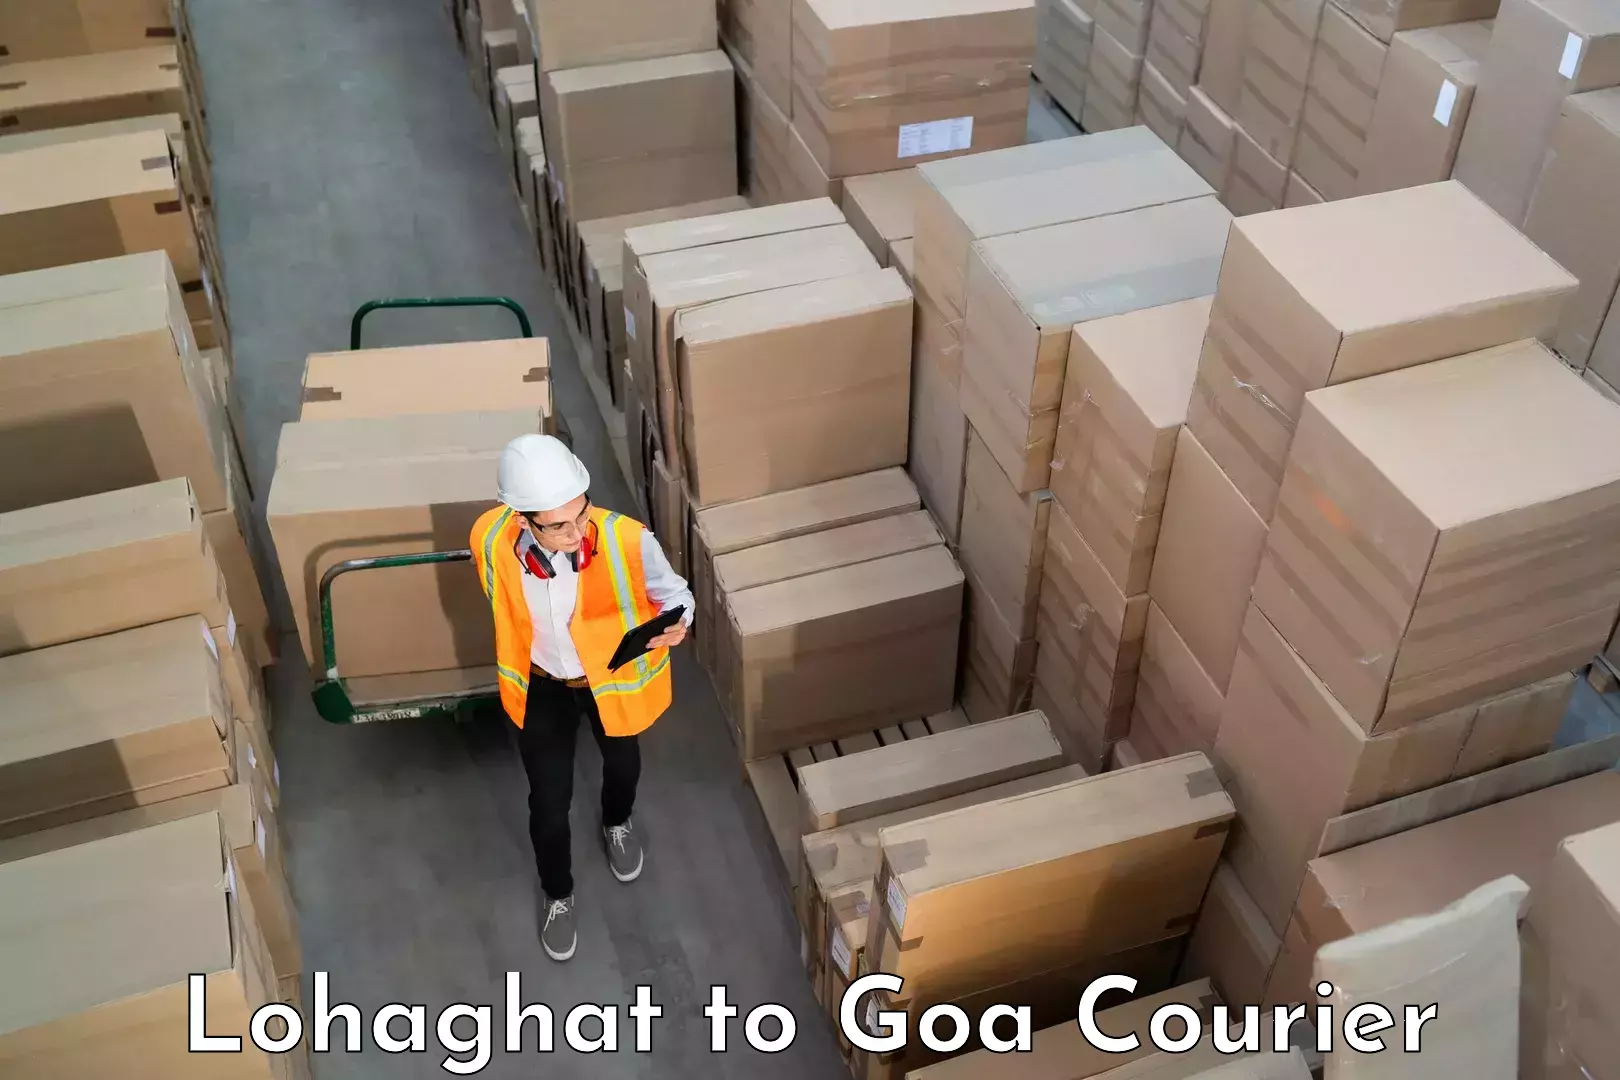 Luggage shipment specialists Lohaghat to Goa